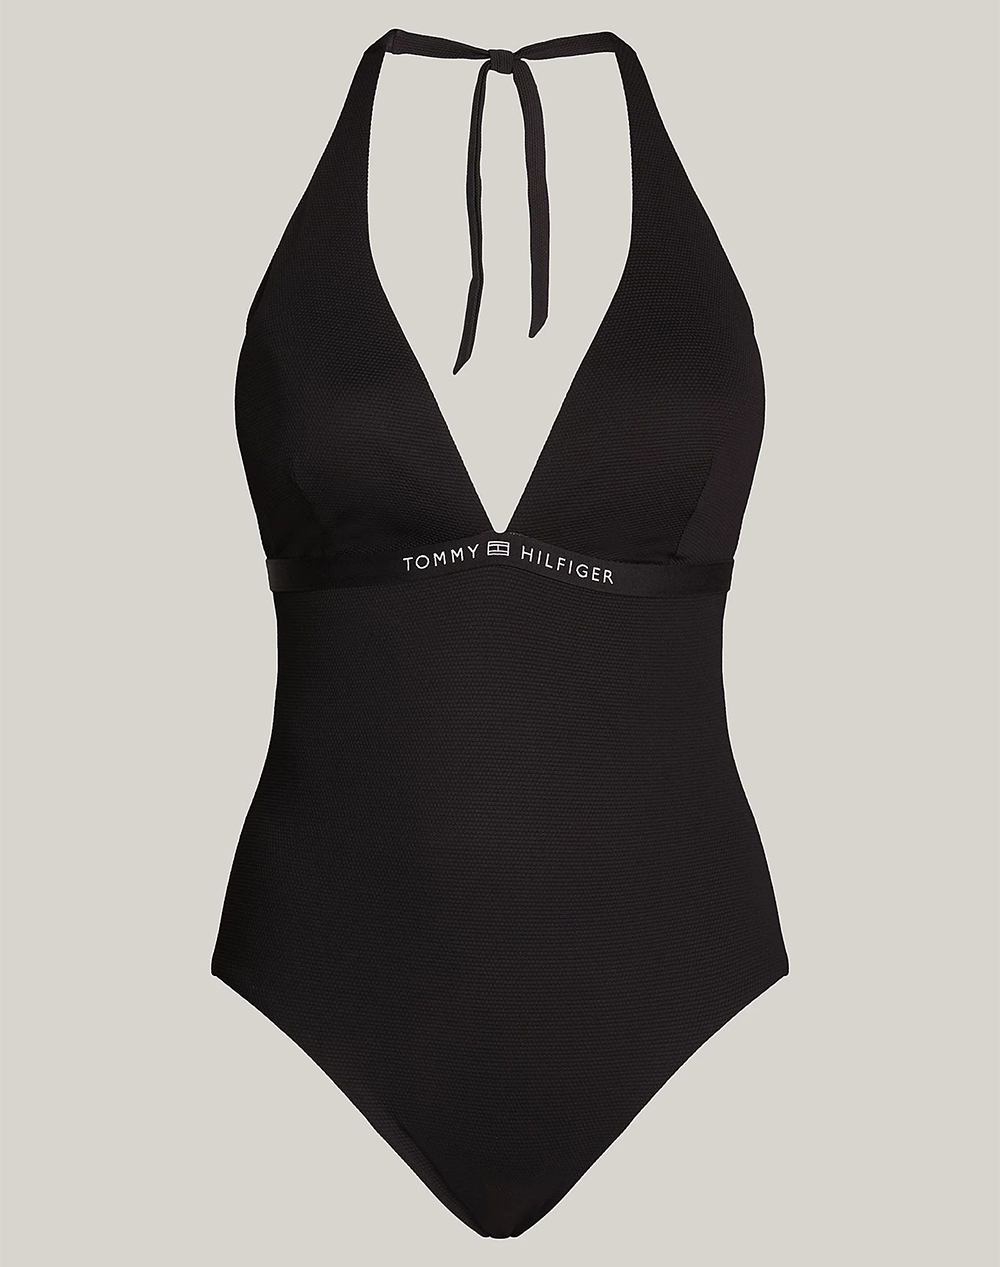 TOMMY HILFIGER HALTER ONE PIECE RP (EXT SIZES)